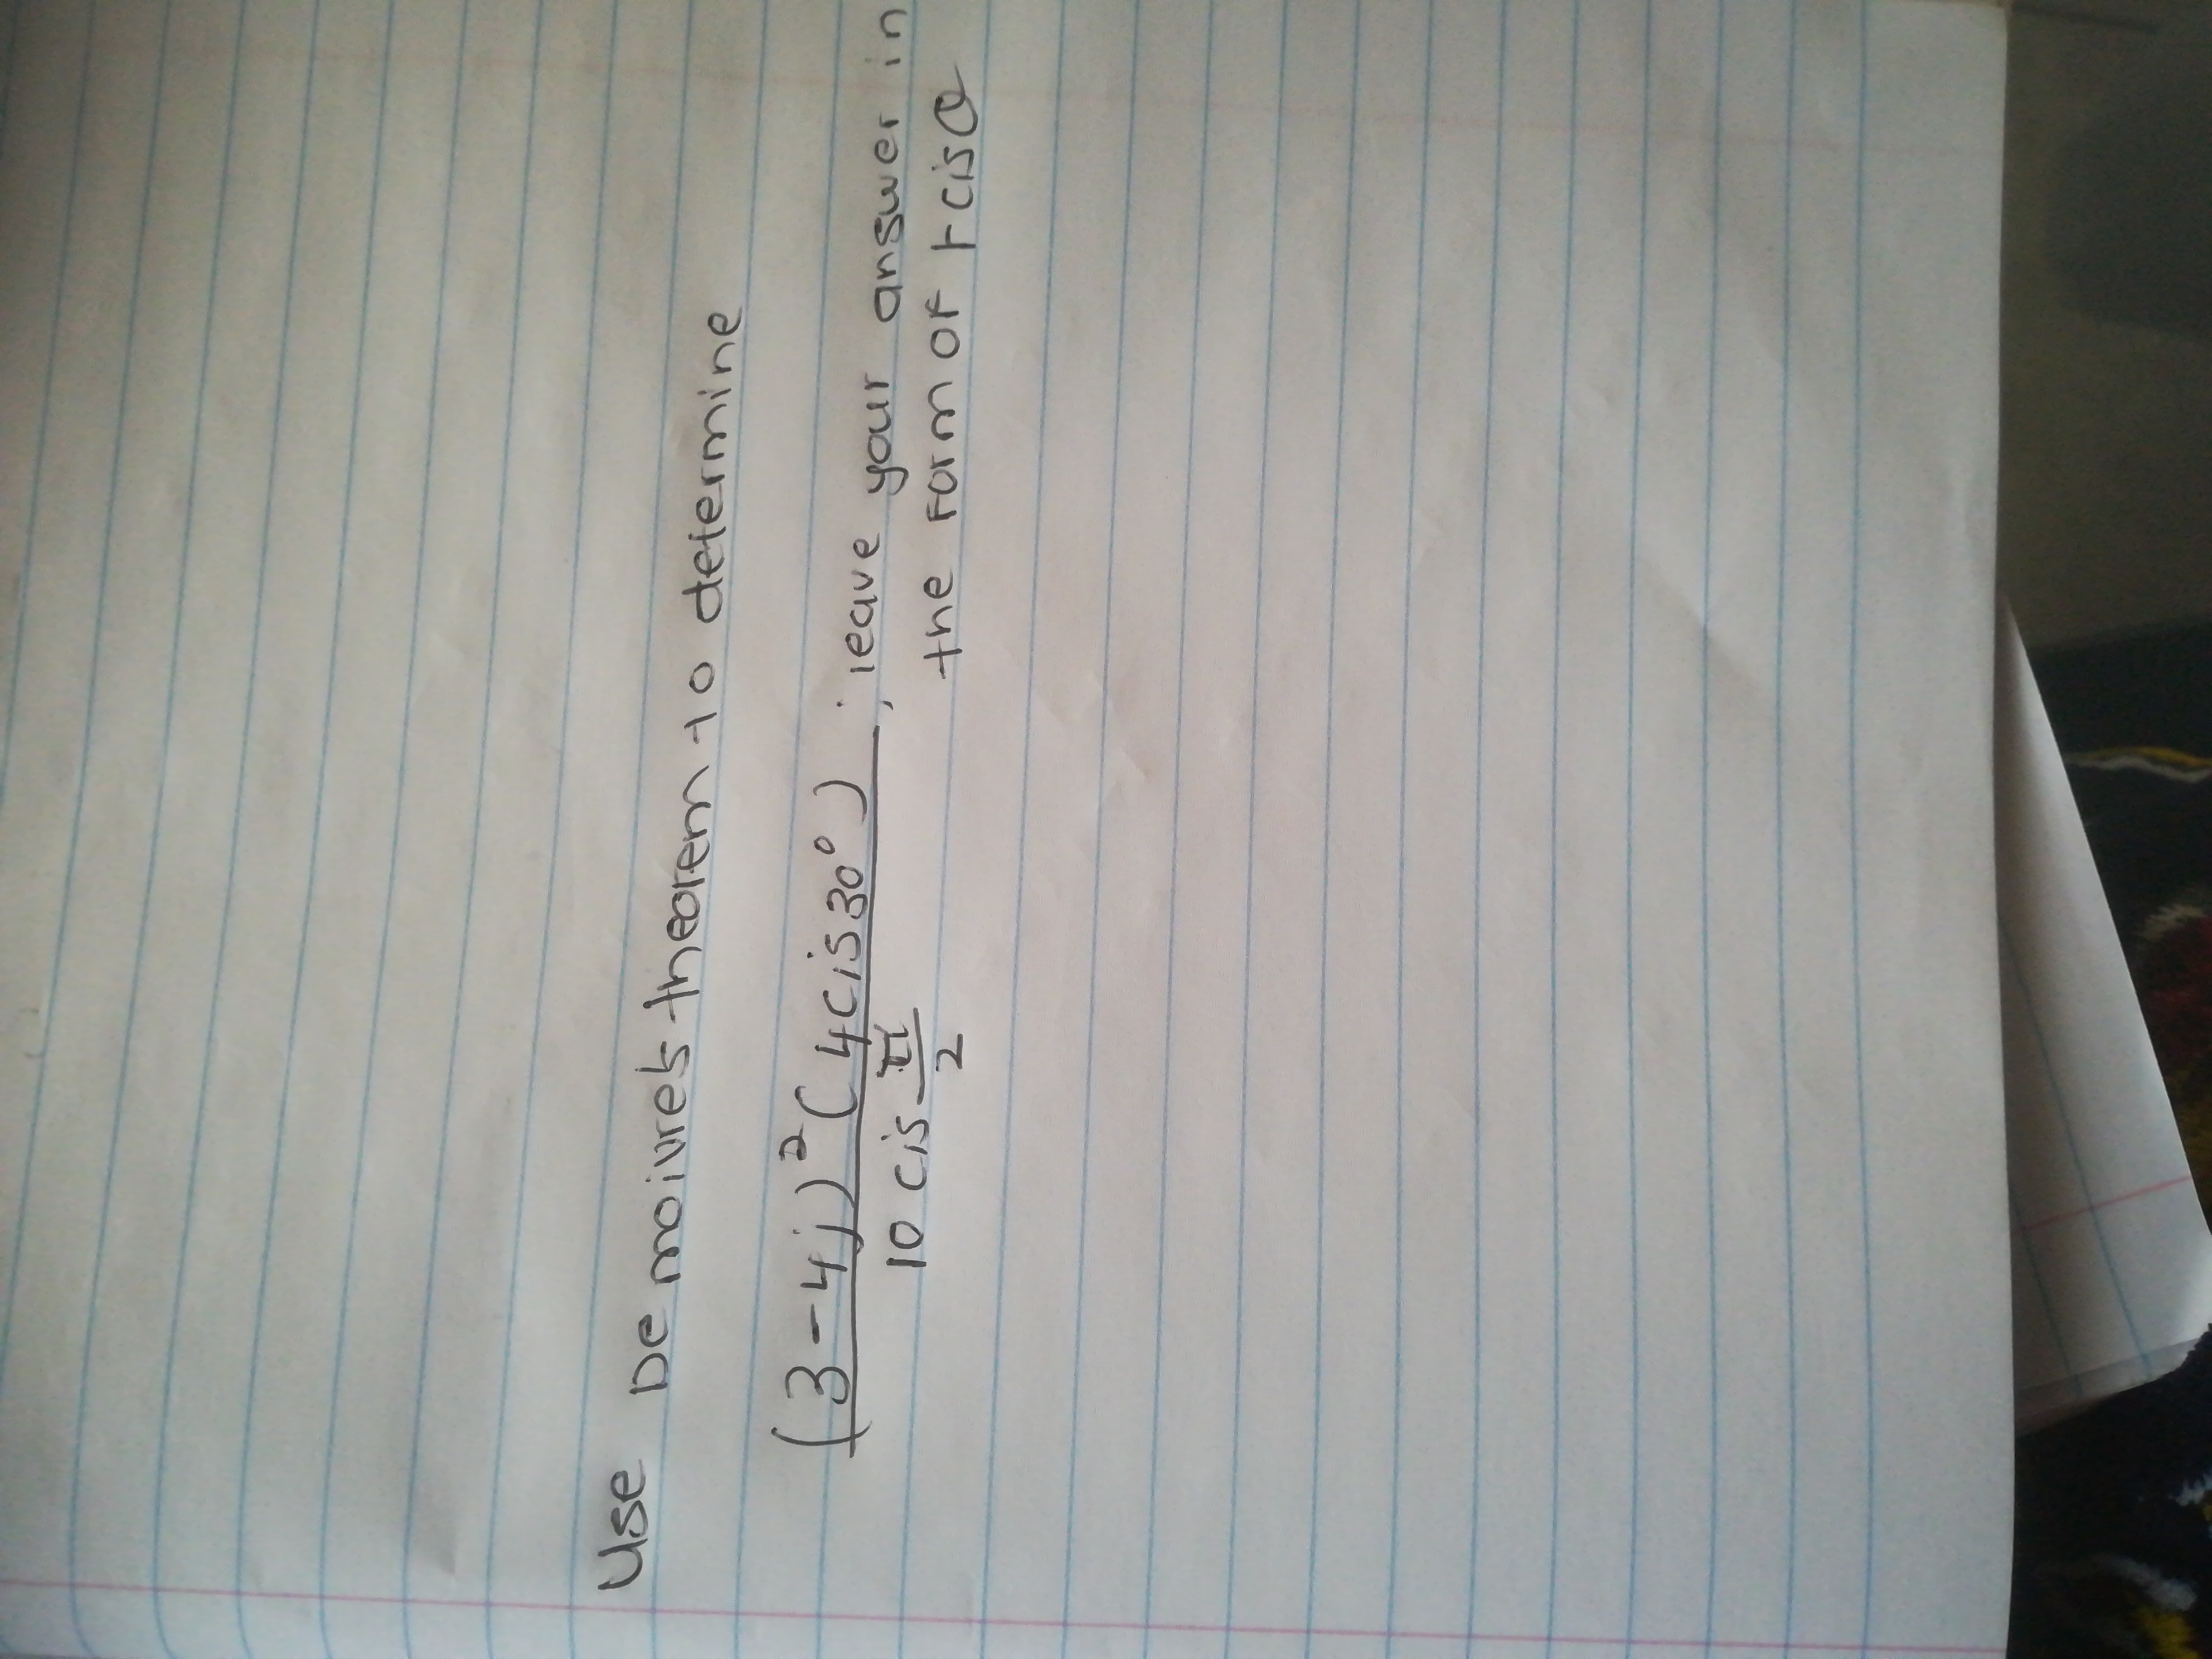 Use
De moivres theorem to determine
(3-4))"C4cis 30° )ieave your answer in
10 CiS
the Formof Fciso
